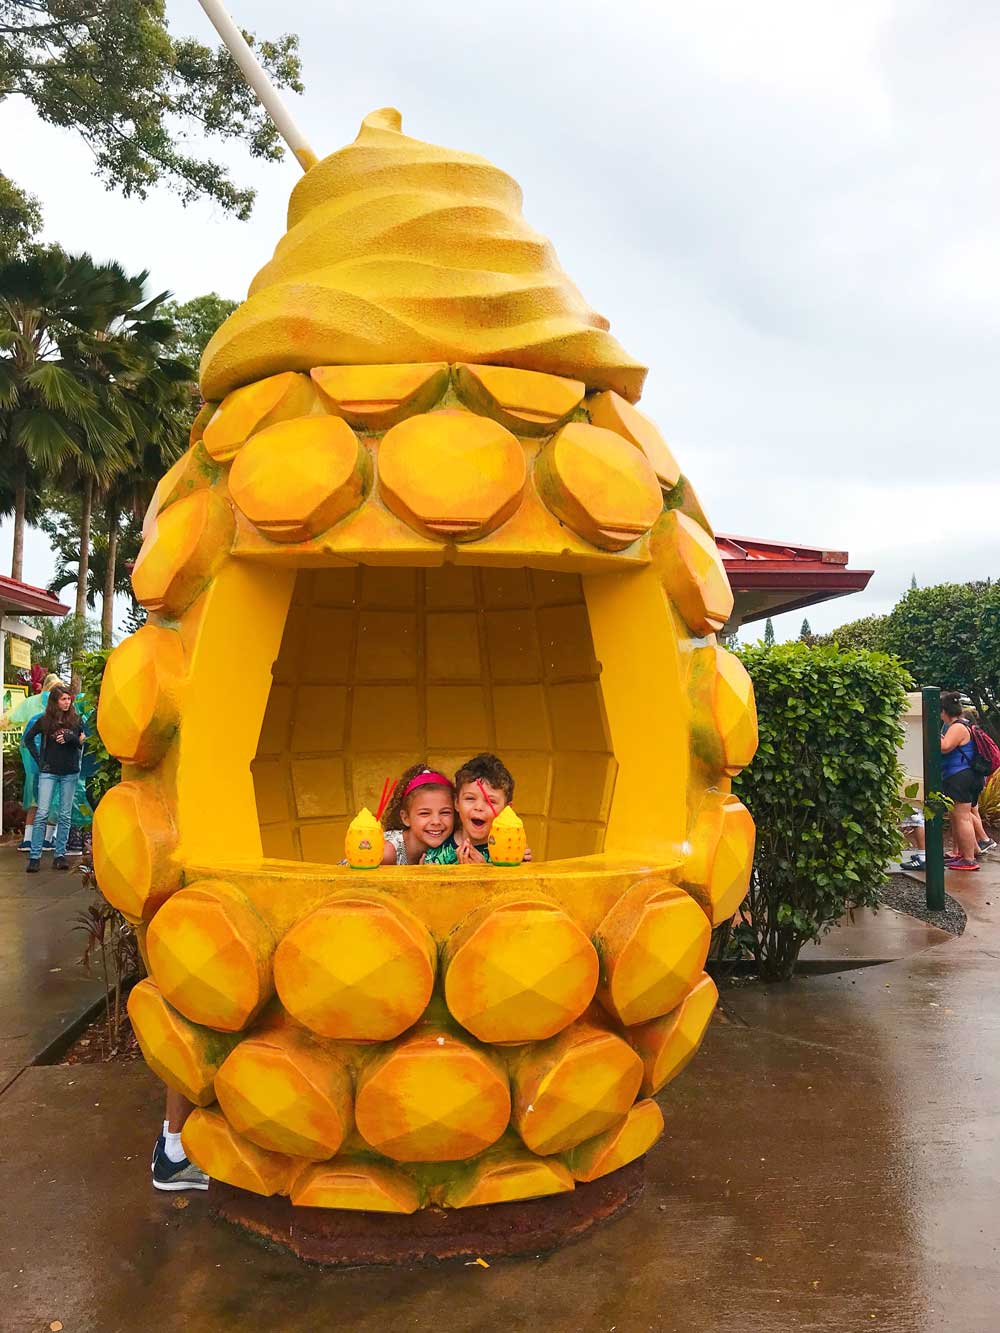 Having fun in a Dole Whip Pineapple at Dole Plantation.